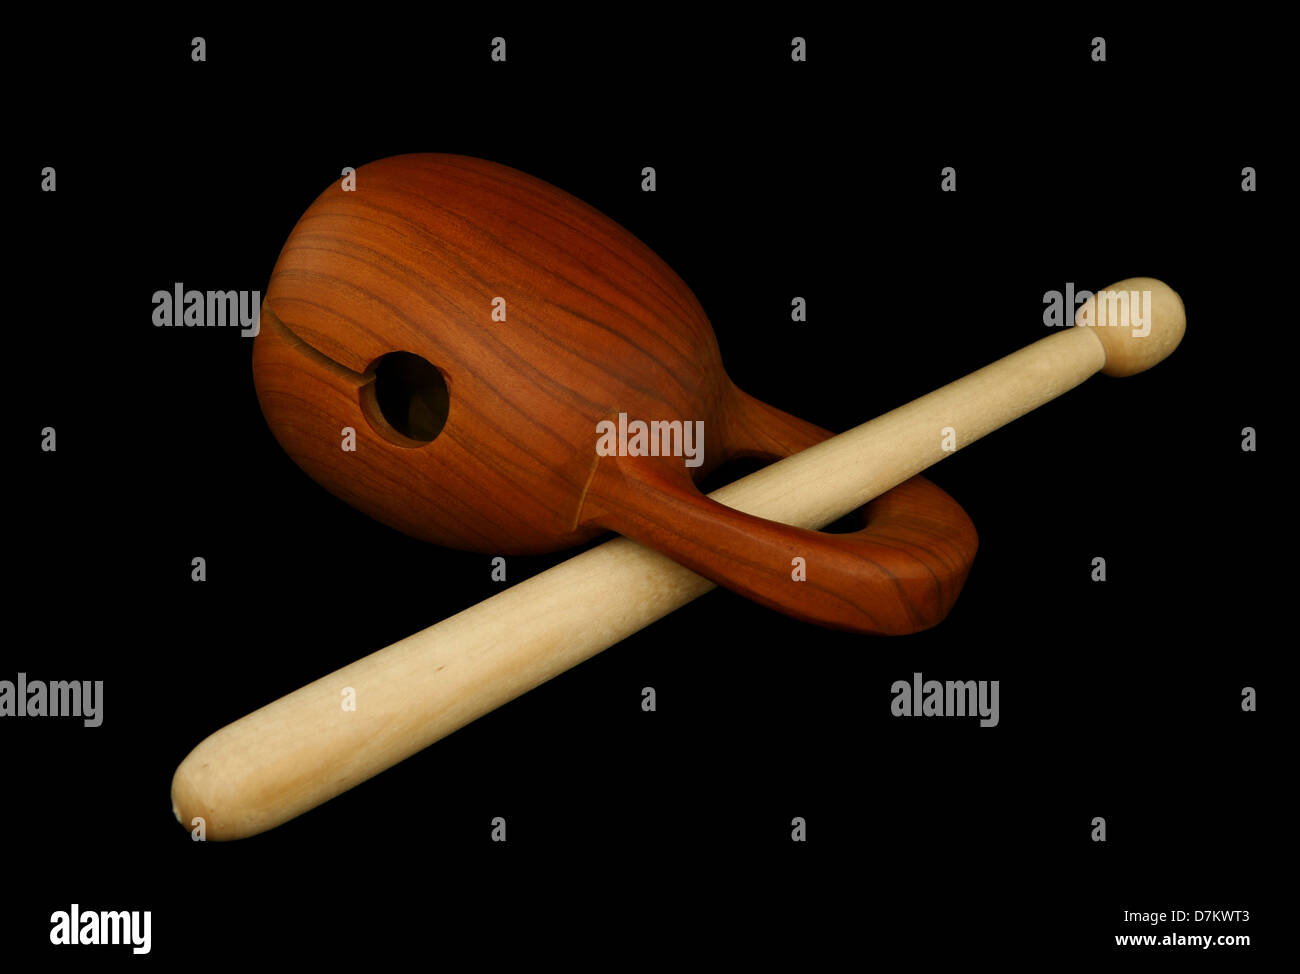 Moktak is a Korean-style wooden fish. Musical percussion instrument used at Buddhist recitation in Korea. Stock Photo